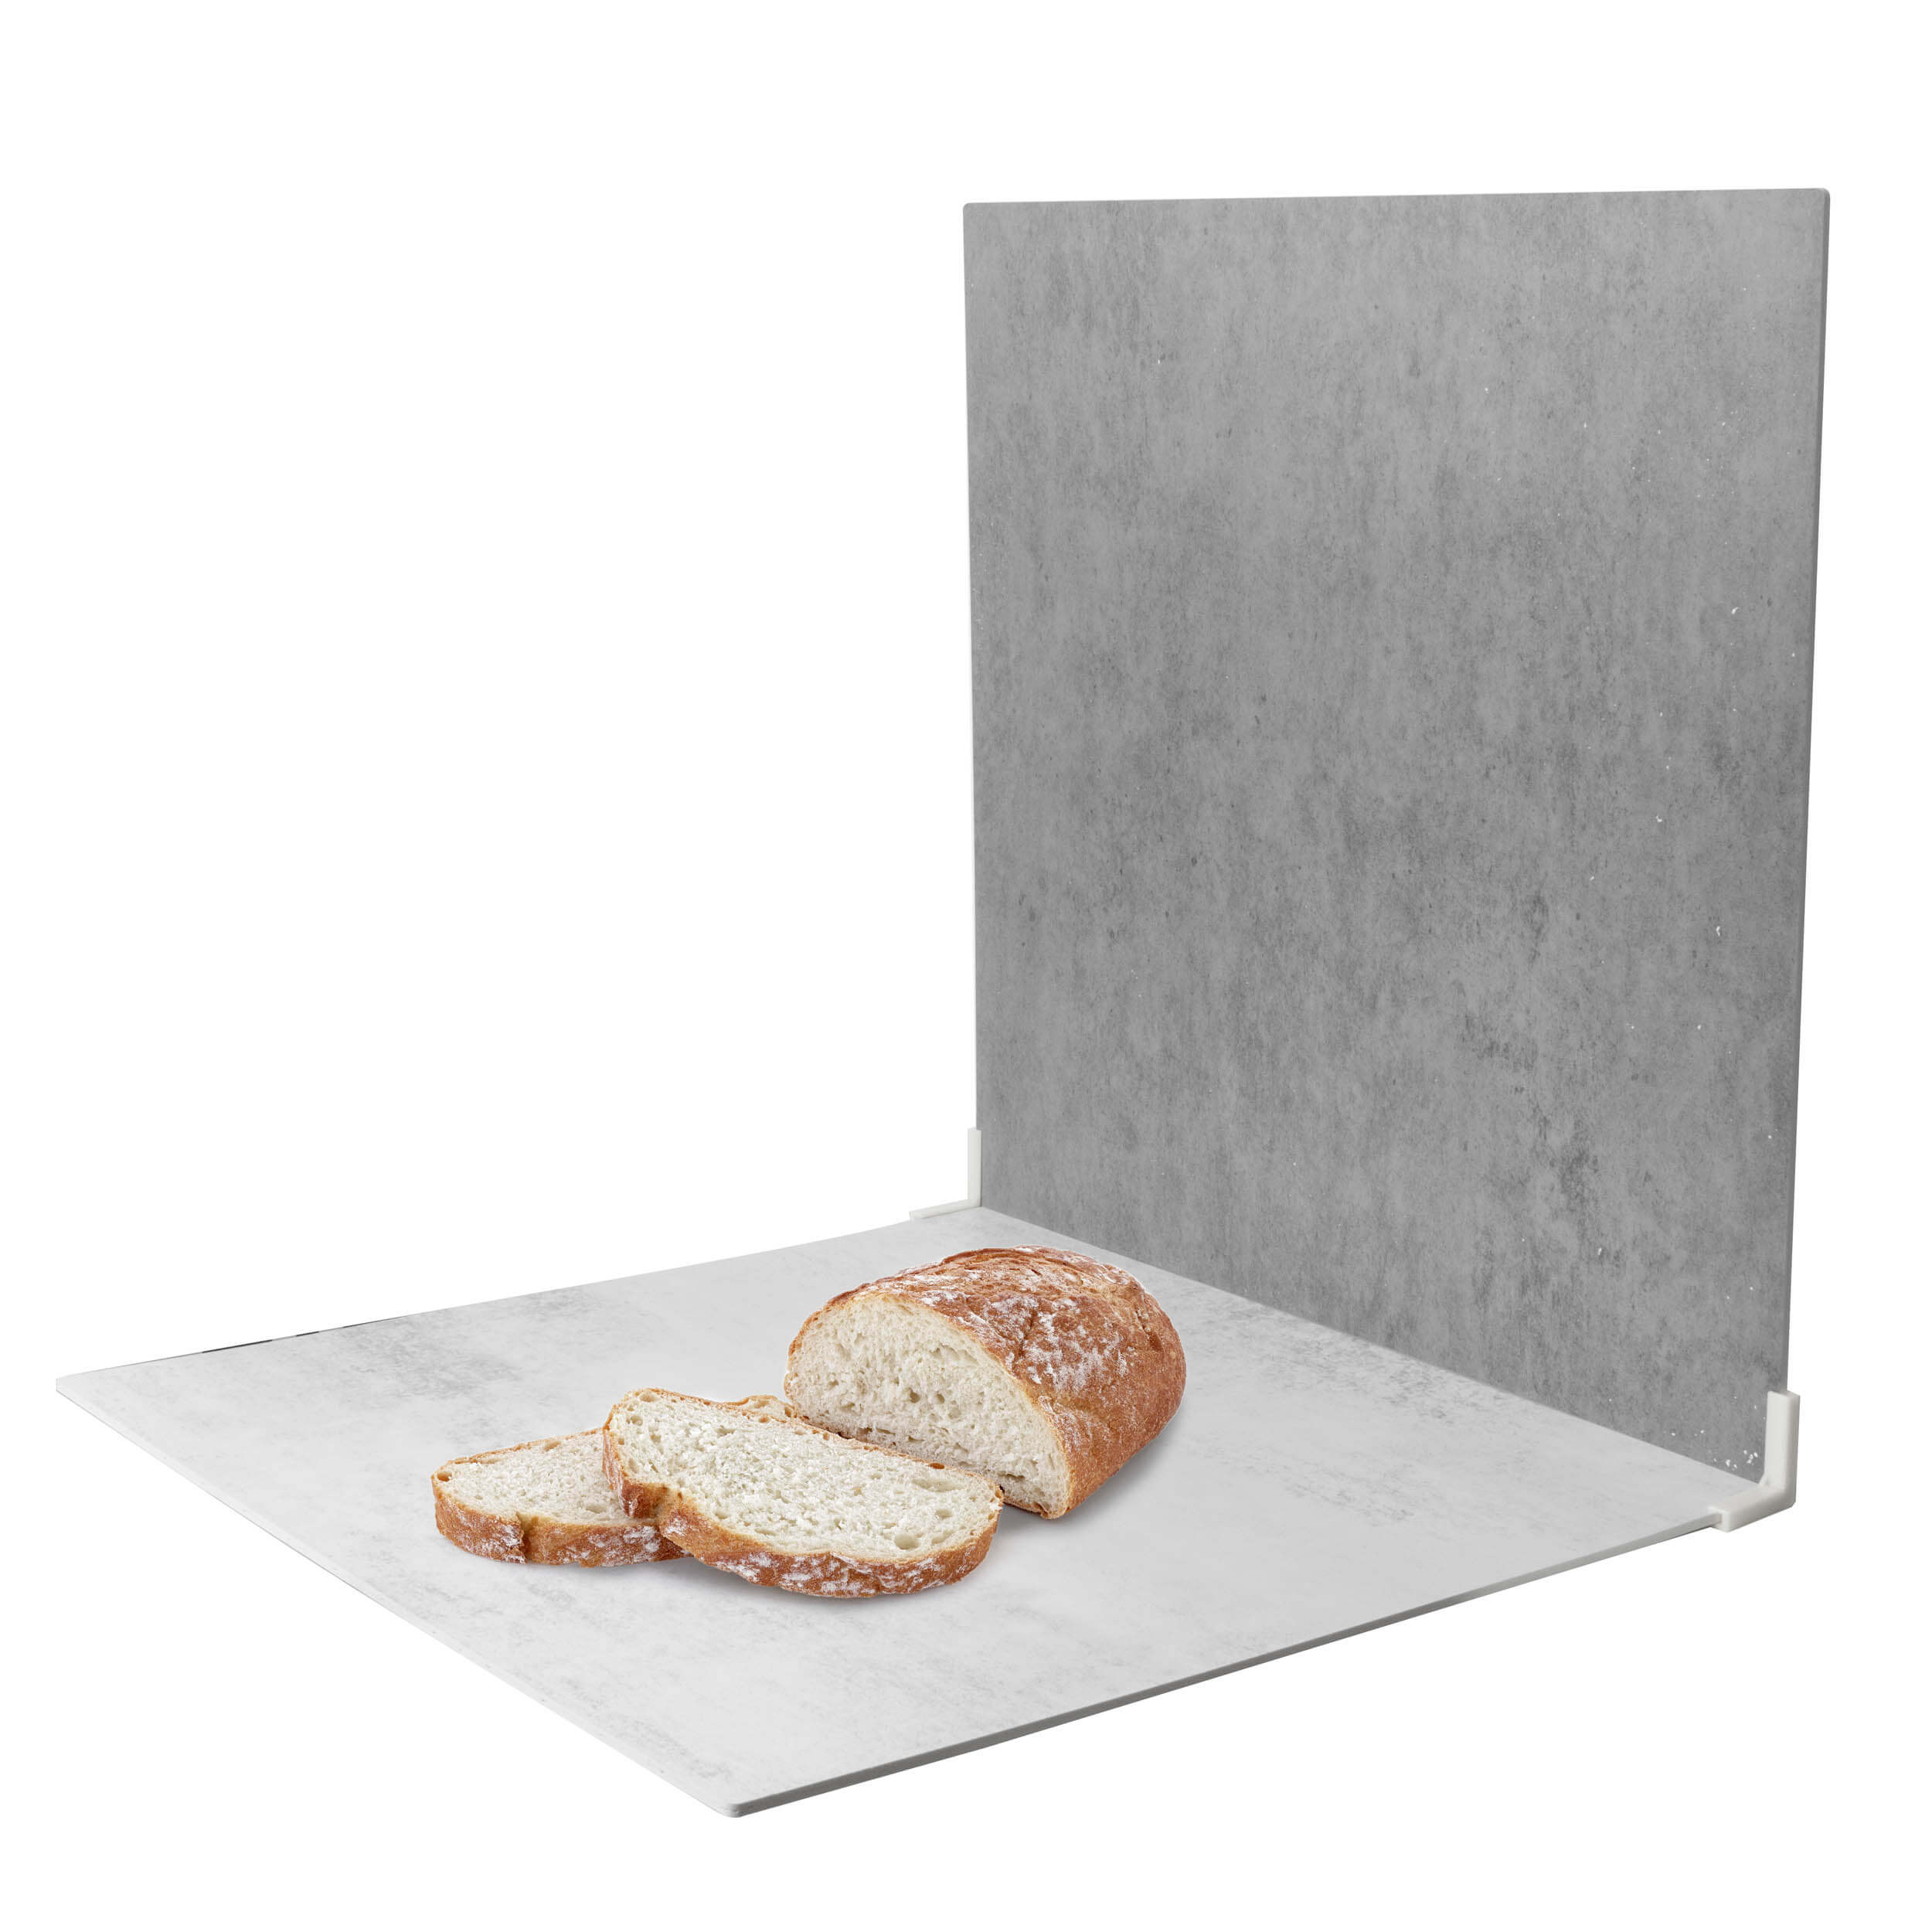 60x60cm Light / Deep Grey Concrete 2-Sided Photography Boards